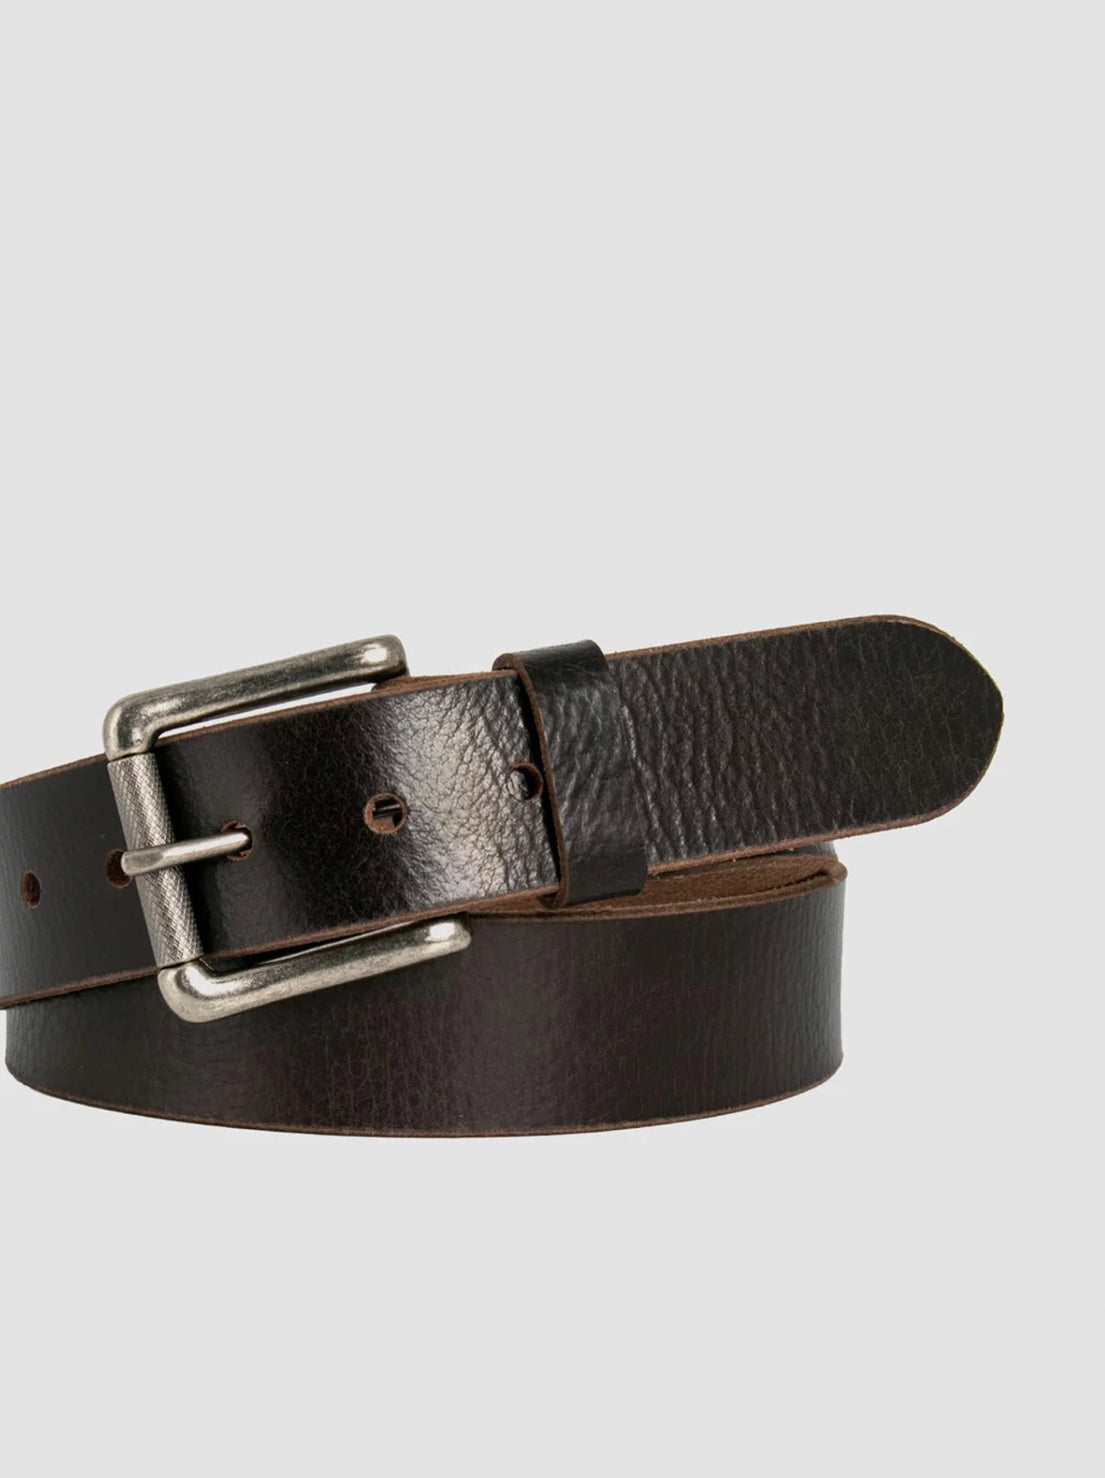 Loop Leather - Urban Central Belt - Chocolate